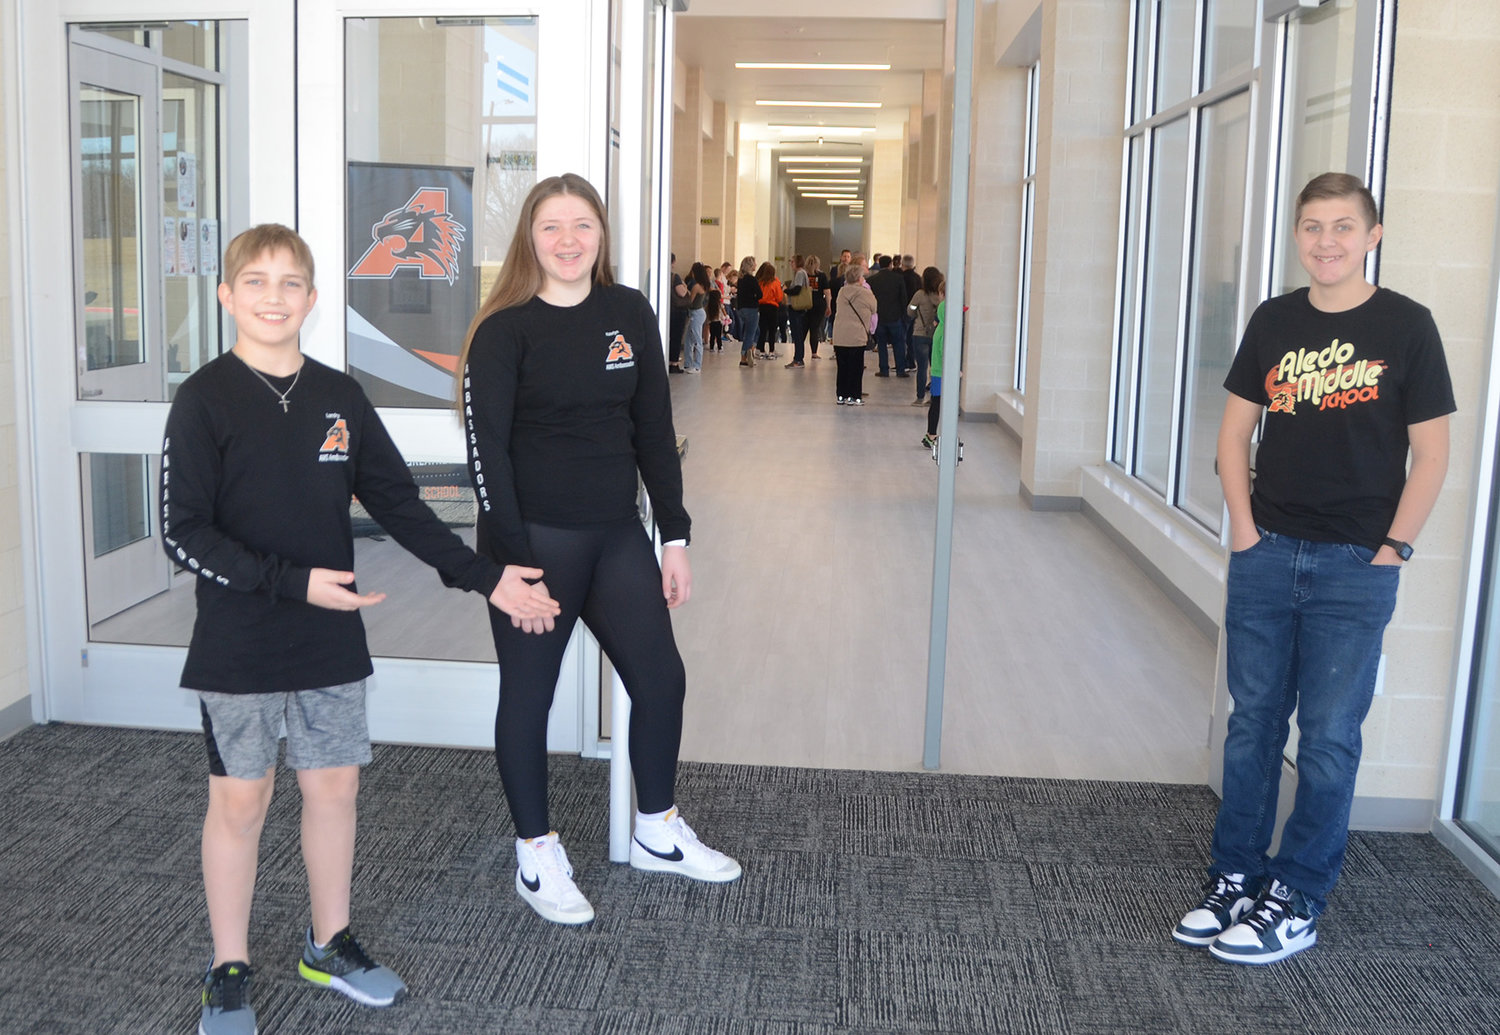 Seventh-graders Landry Kasper and Katlyn Lowe and eighth-grader Kale Roberson greeted guests Sunday at the ribbon cutting ceremony and open house of the newly-renovated Aledo Middle School.